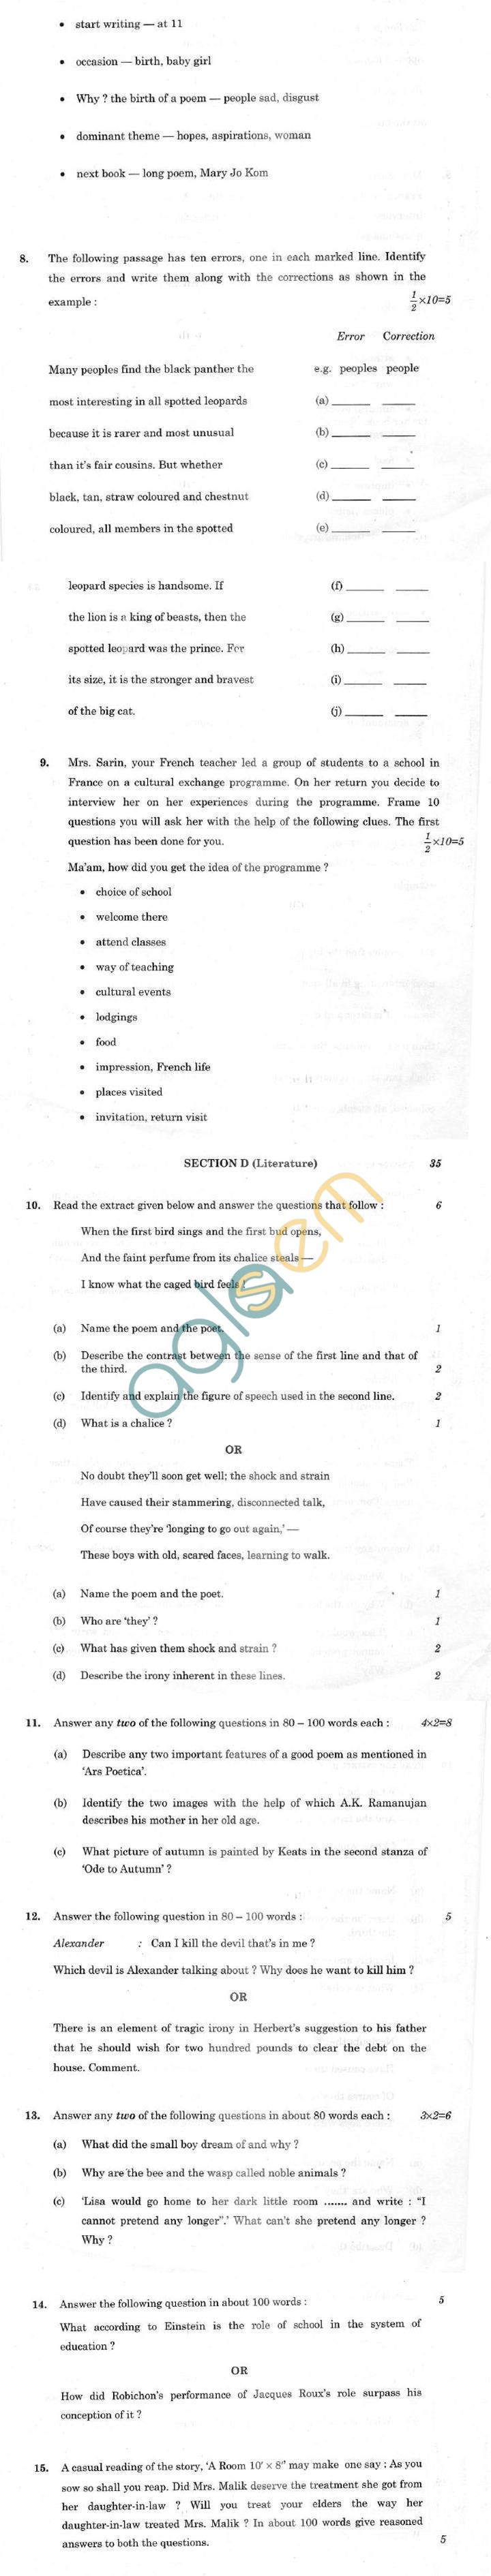 CBSE Compartment Exam 2013 Class XII Question Paper - Functional English